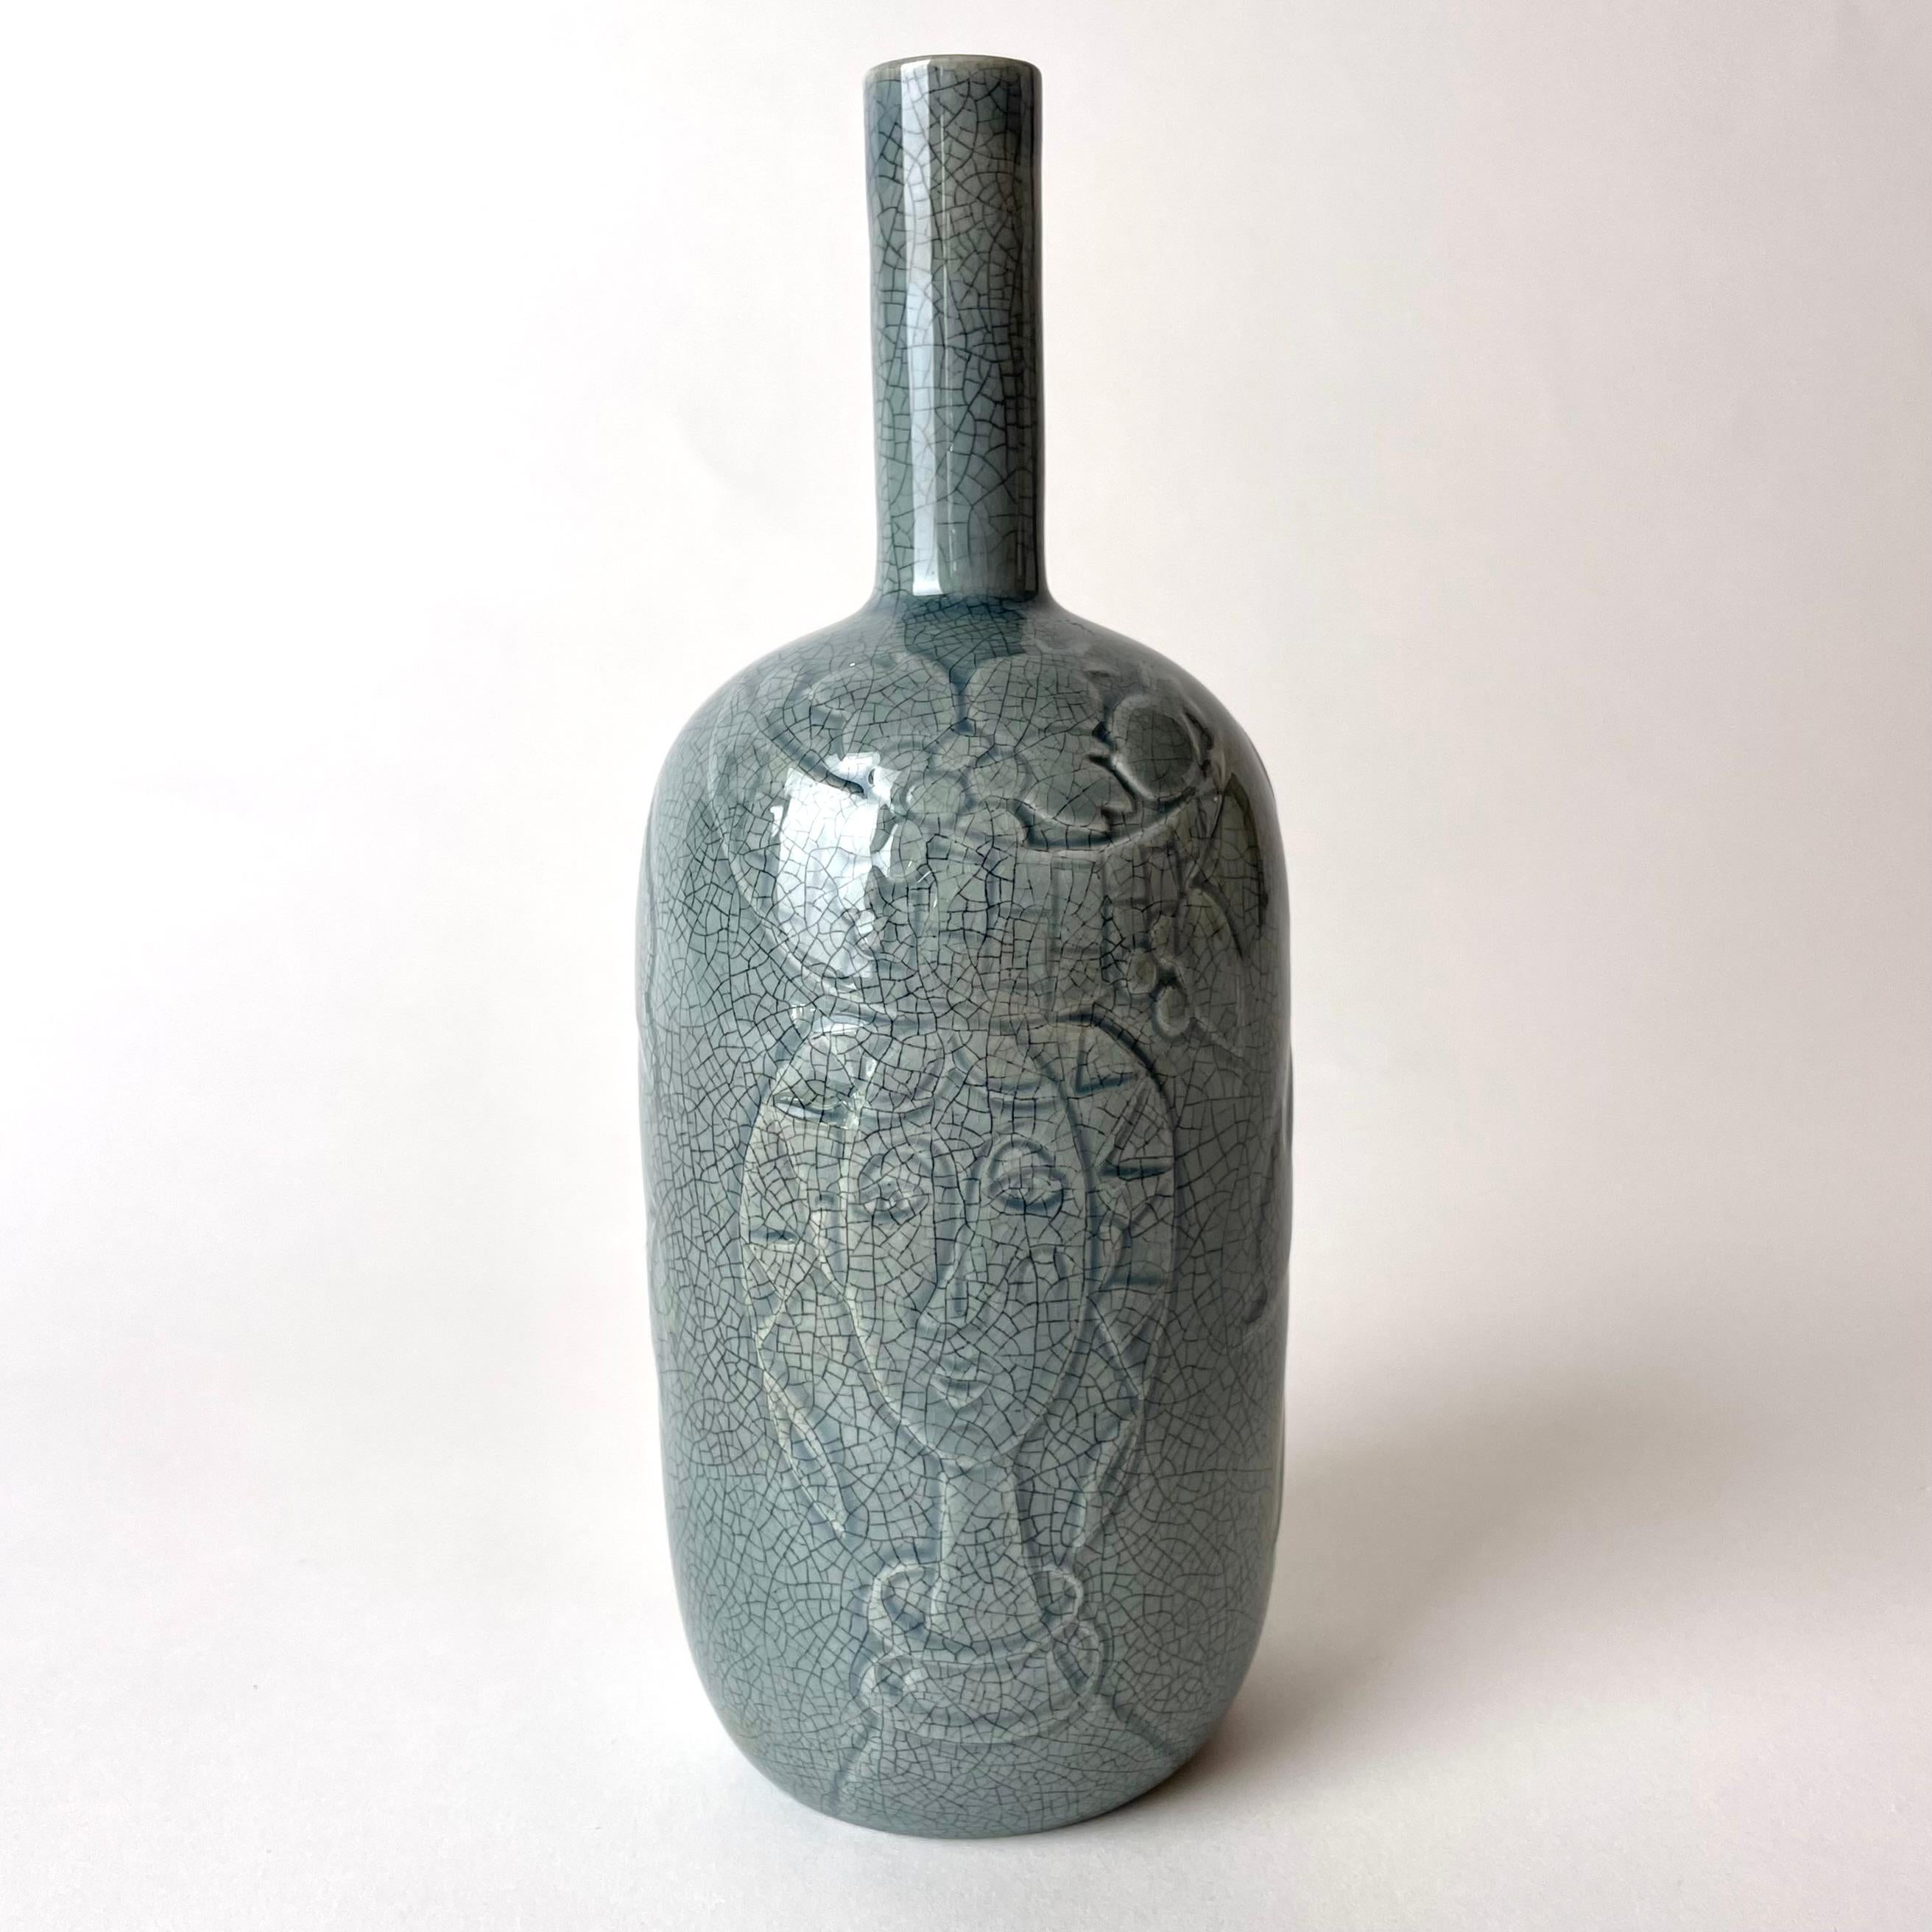 Beautiful ceramic Vase by Carl-Harry Stålhane (1920-1990), Rörstrands Porslinsfabrik, Sweden from the Mid-20th Century. Decorated with two different women carrying bowls of fruit on their heads, signed CHS and Rörstarand. Beautiful color with a